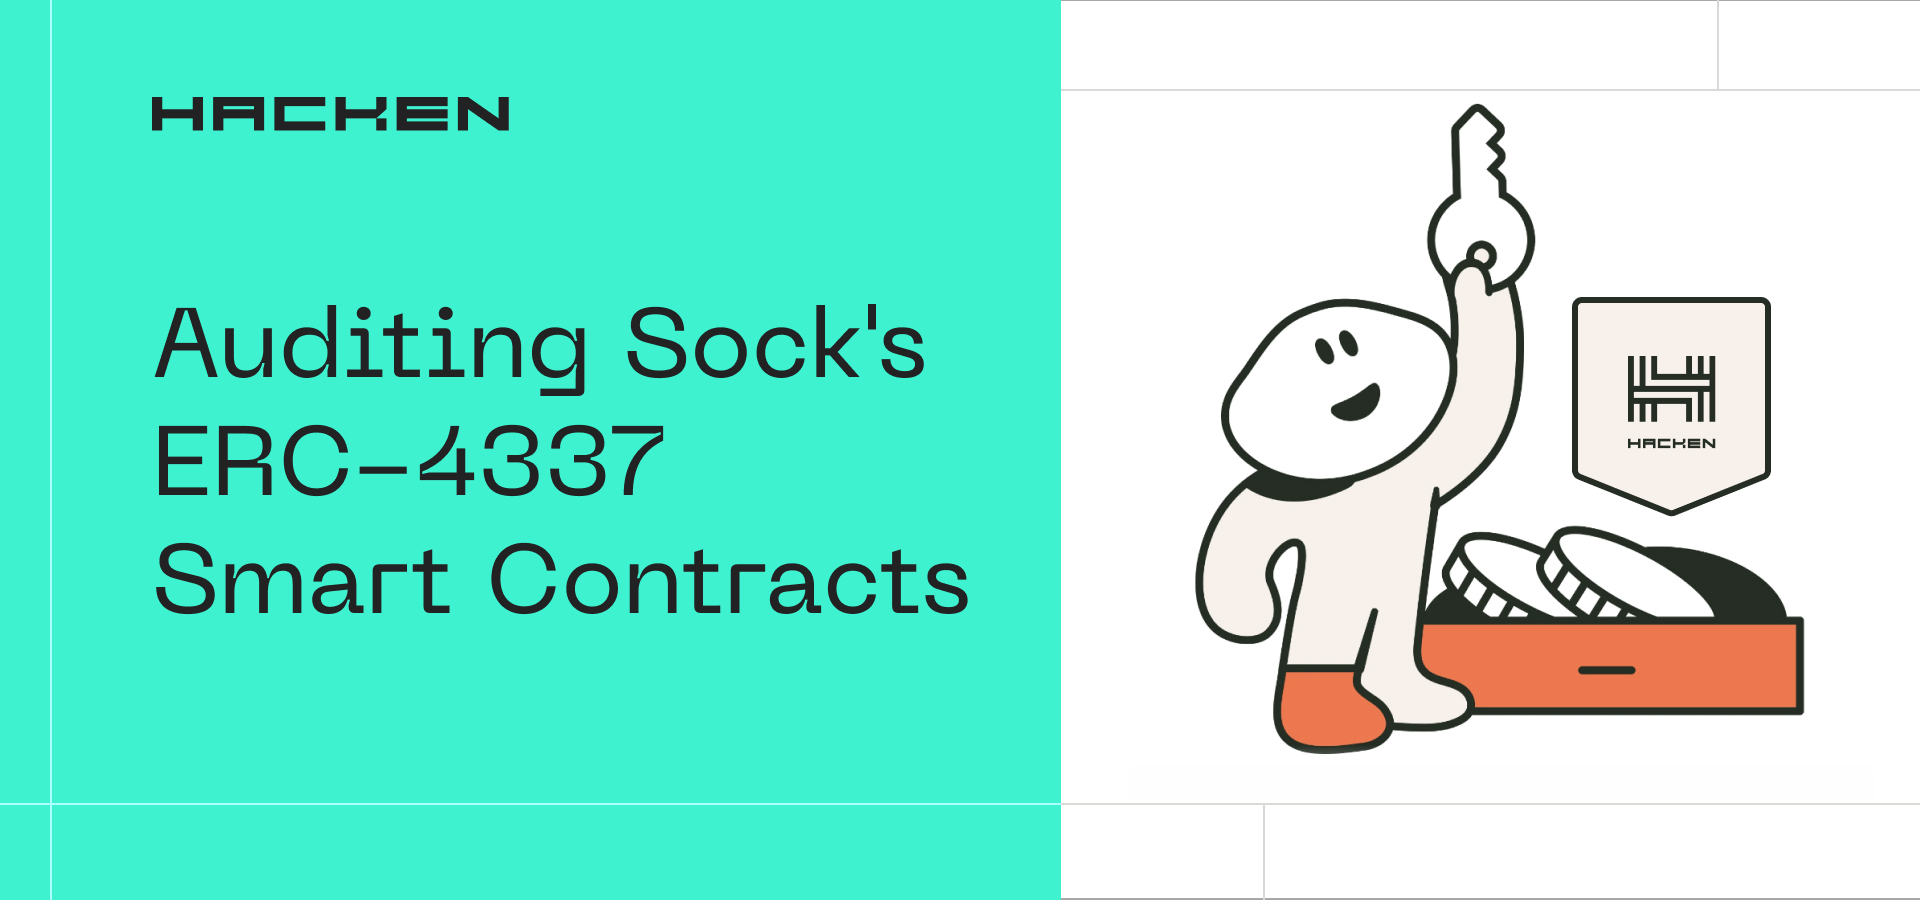 Auditing Sock's ERC-4337 Smart Contracts